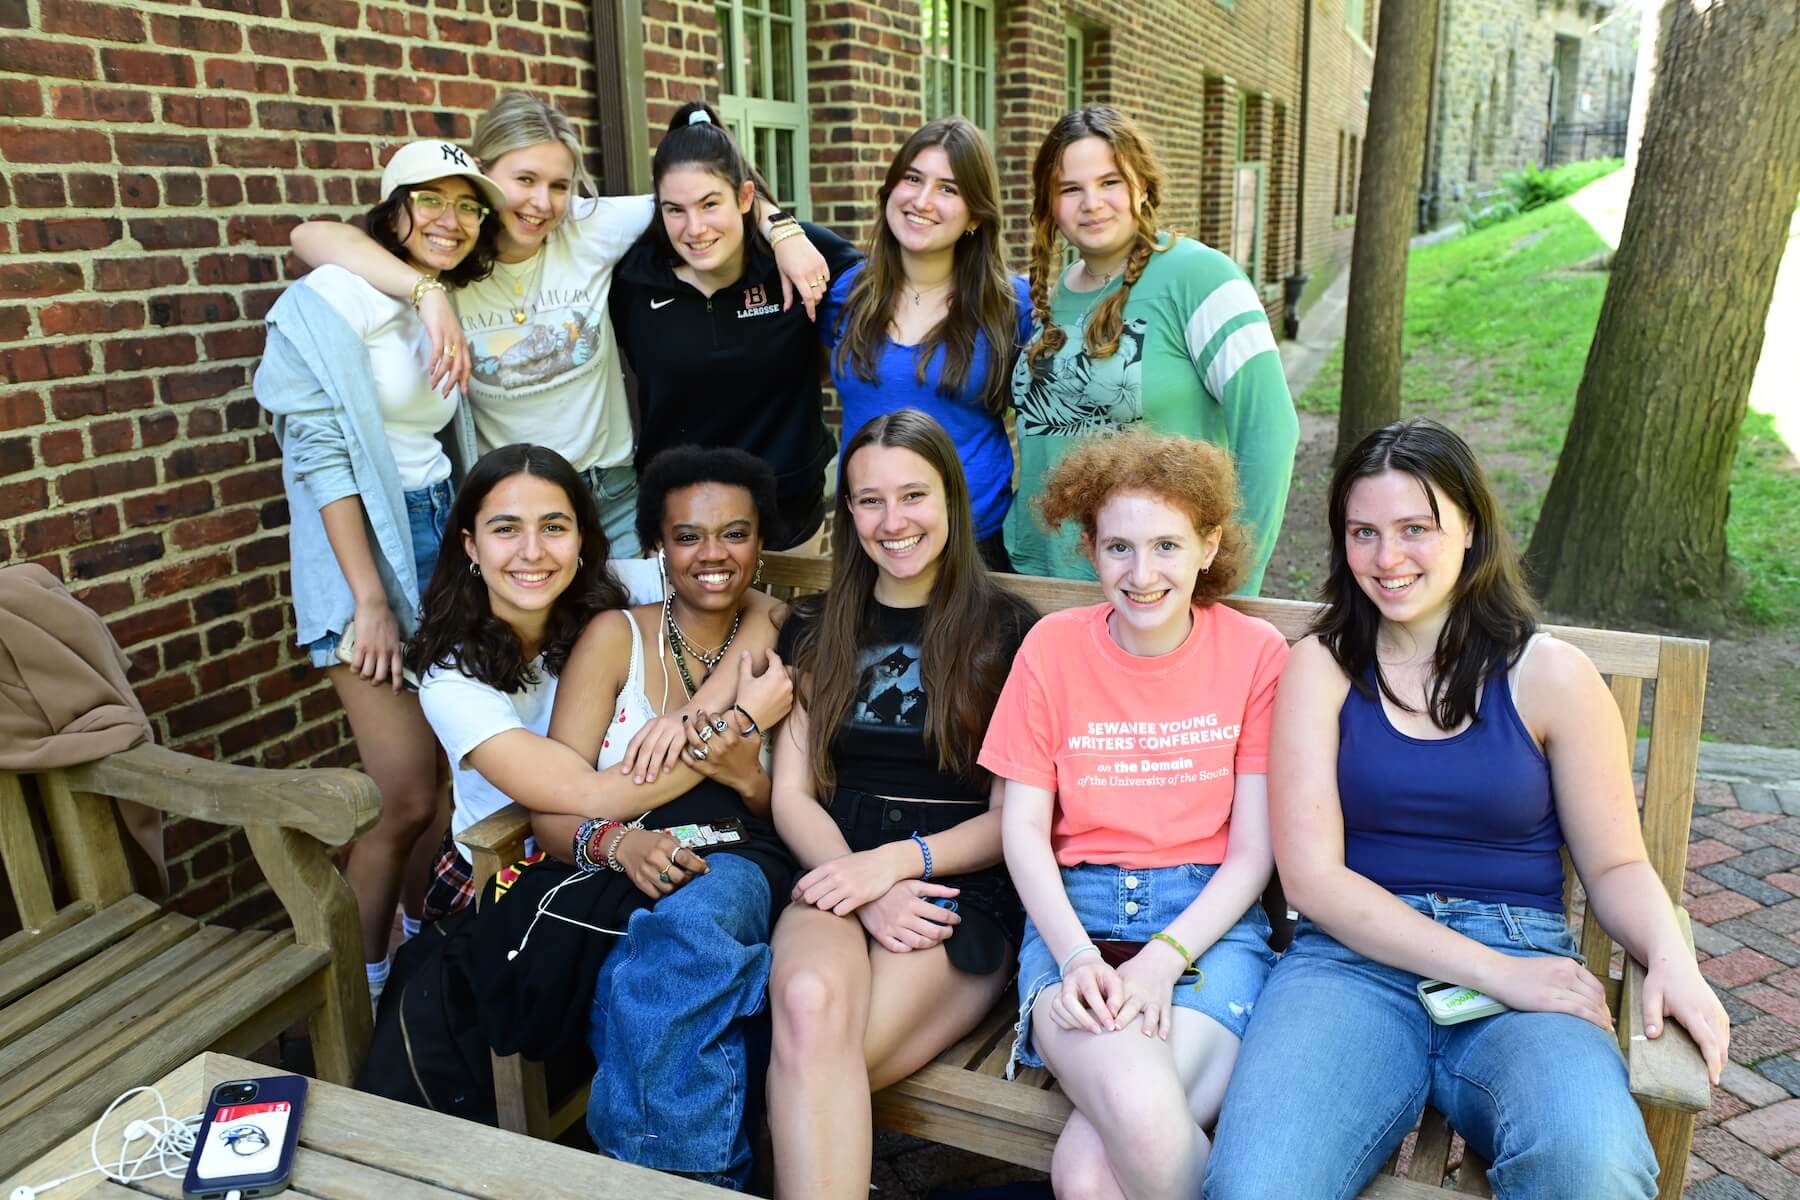 Ethical Culture Fieldston School Upper School students gather for photo on the Quad